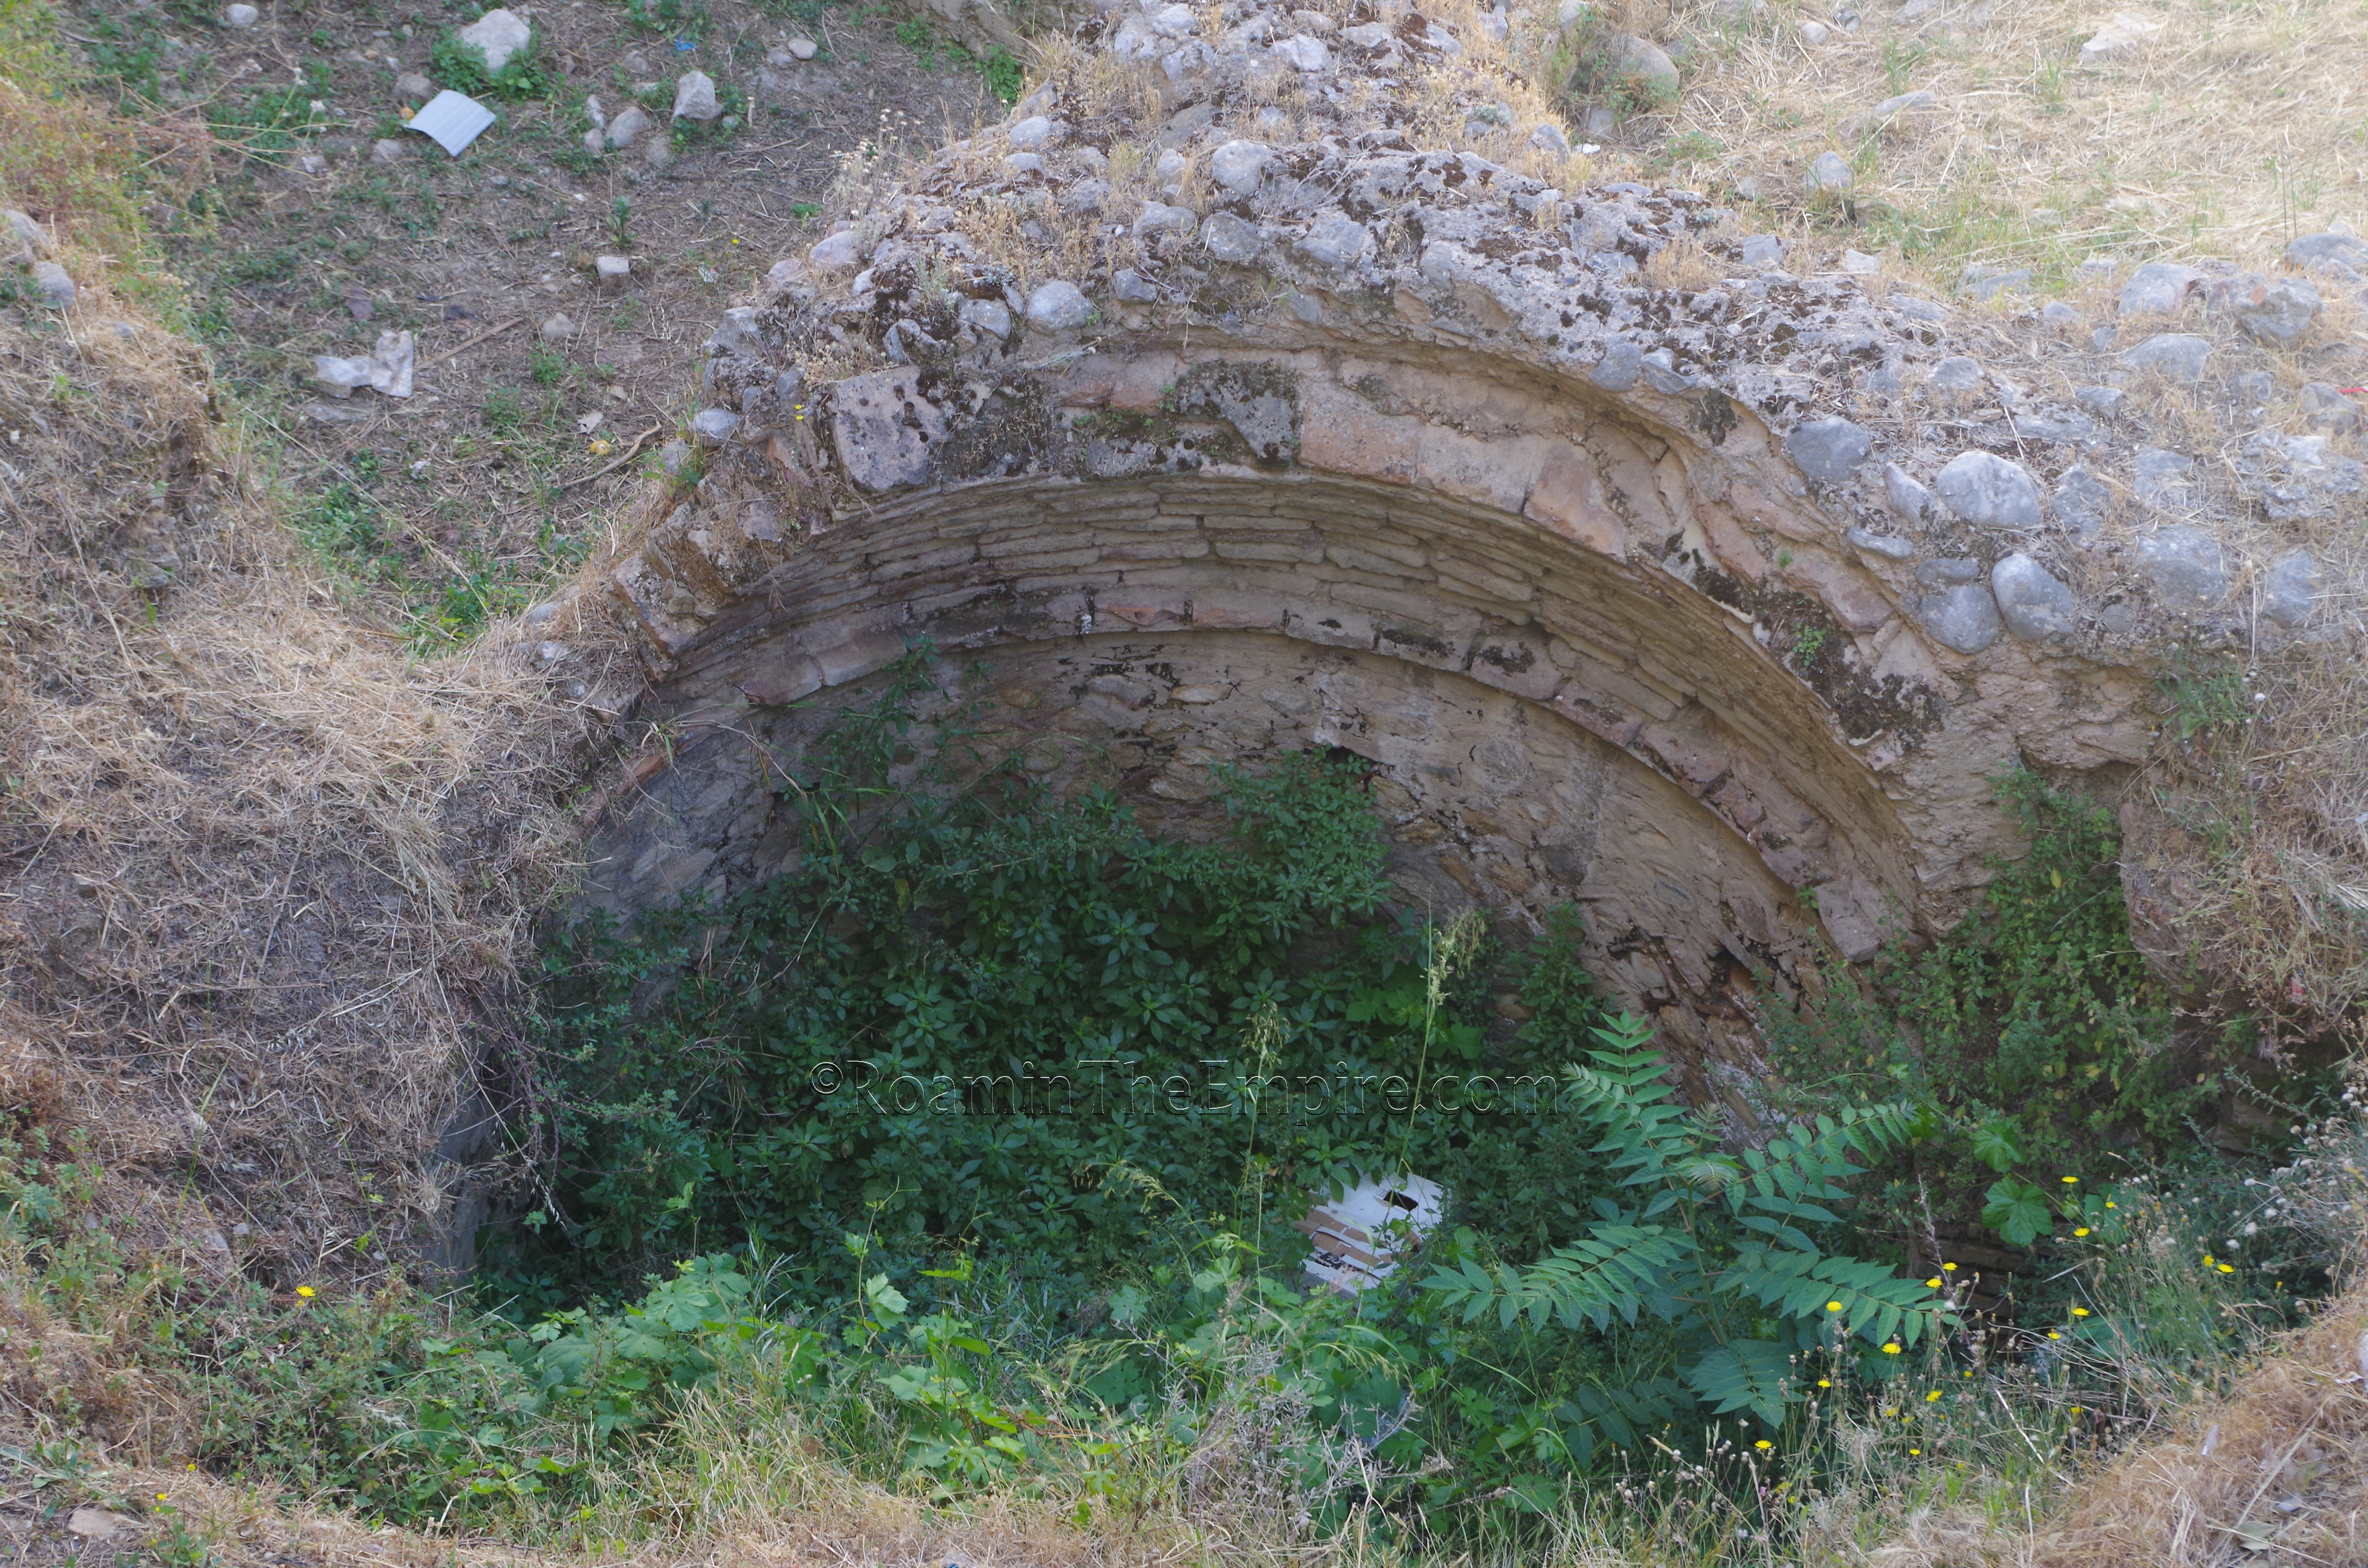 Detail of the well-like structure in the excavated area adjacent the odeon.